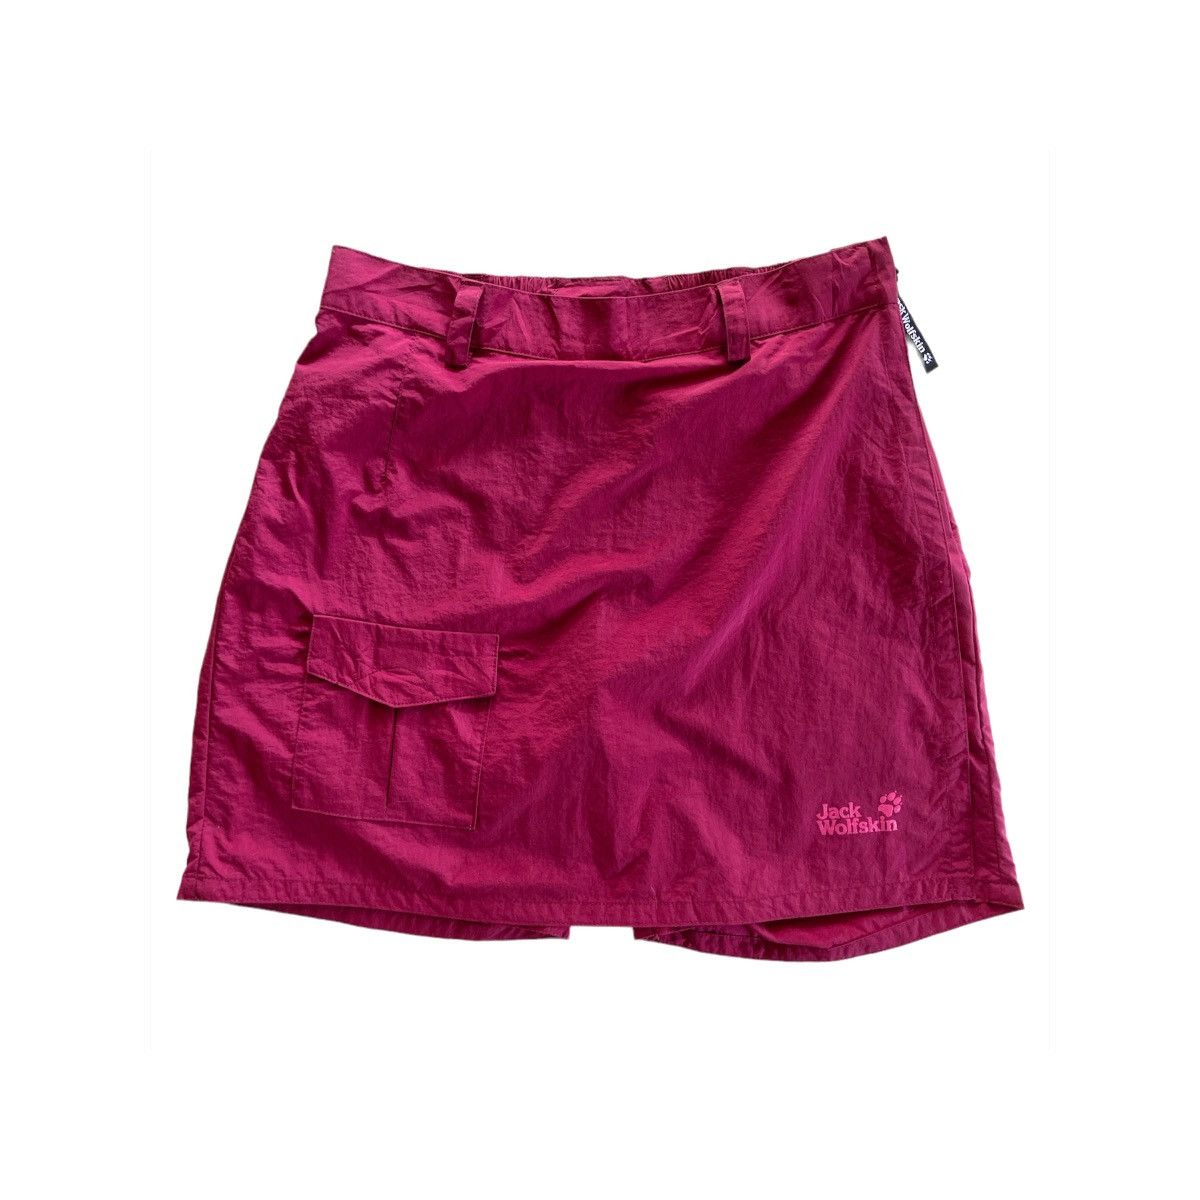 Outdoor Style Go Out! - Jack Wolfskin Utility Shorts - 1